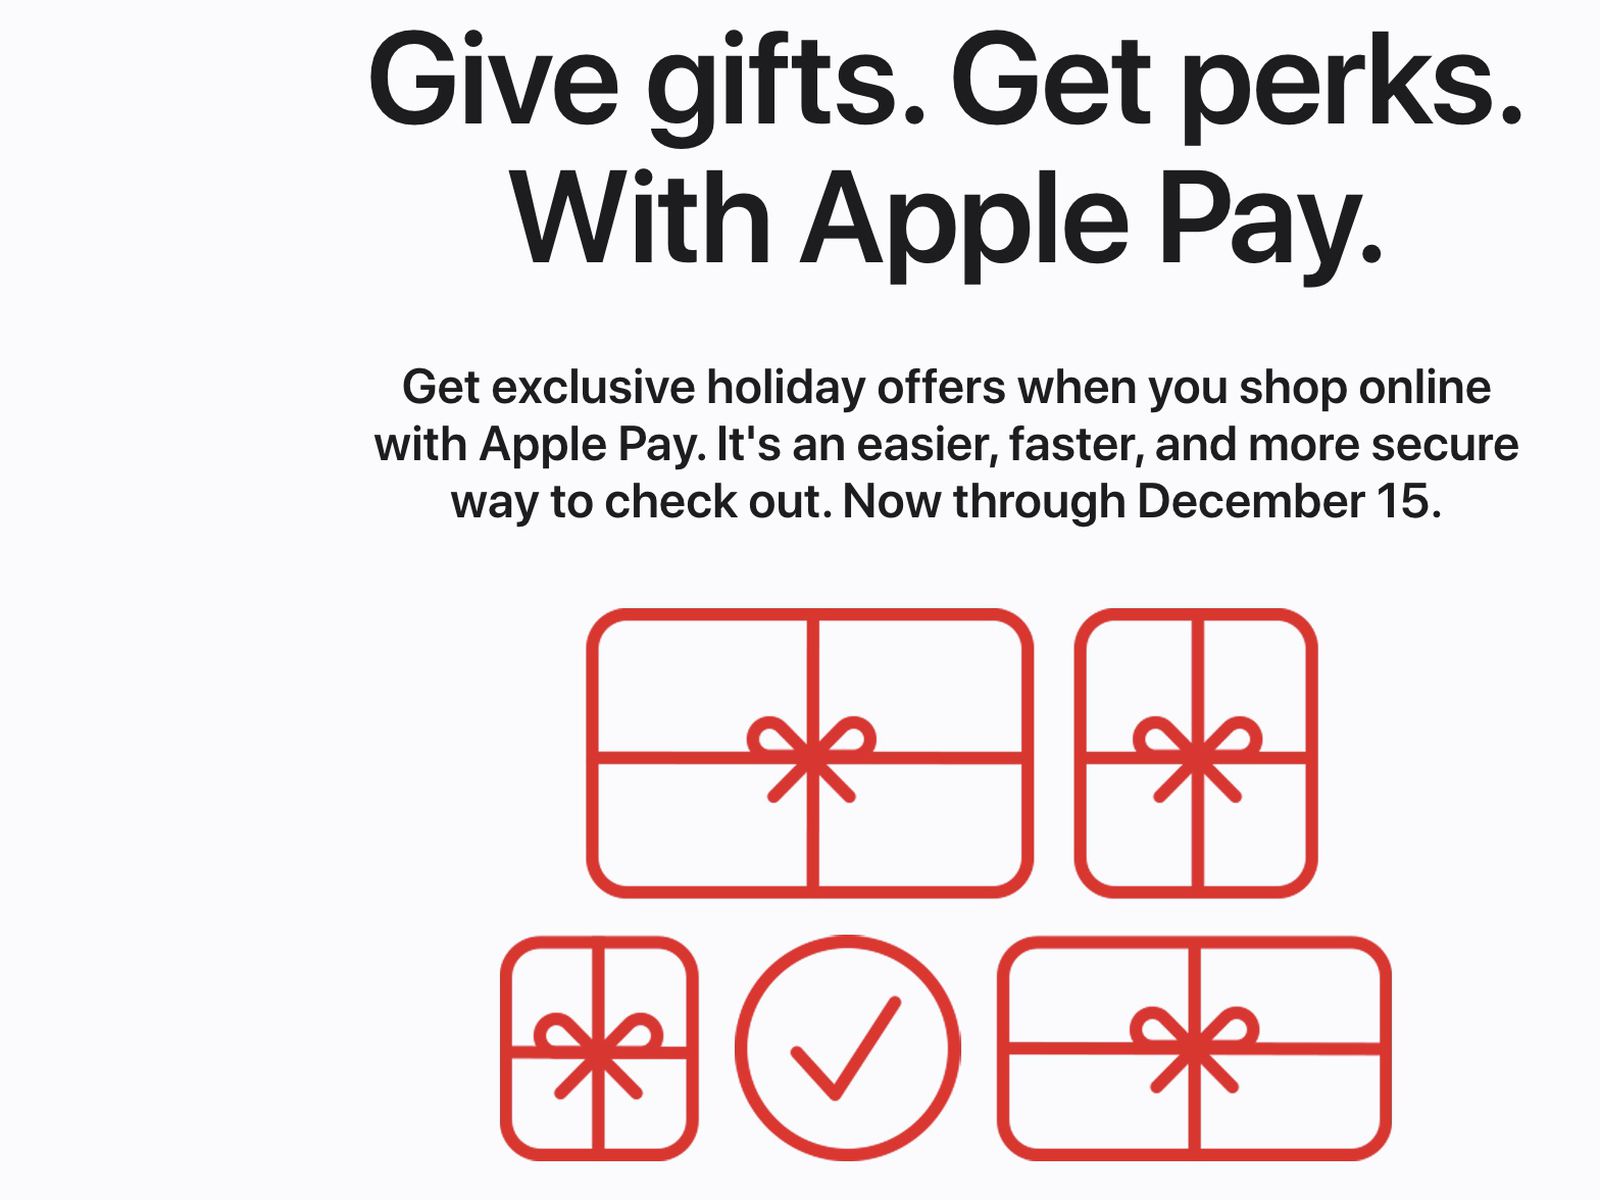 Apple is now offering two-hour holiday delivery for just $5 in